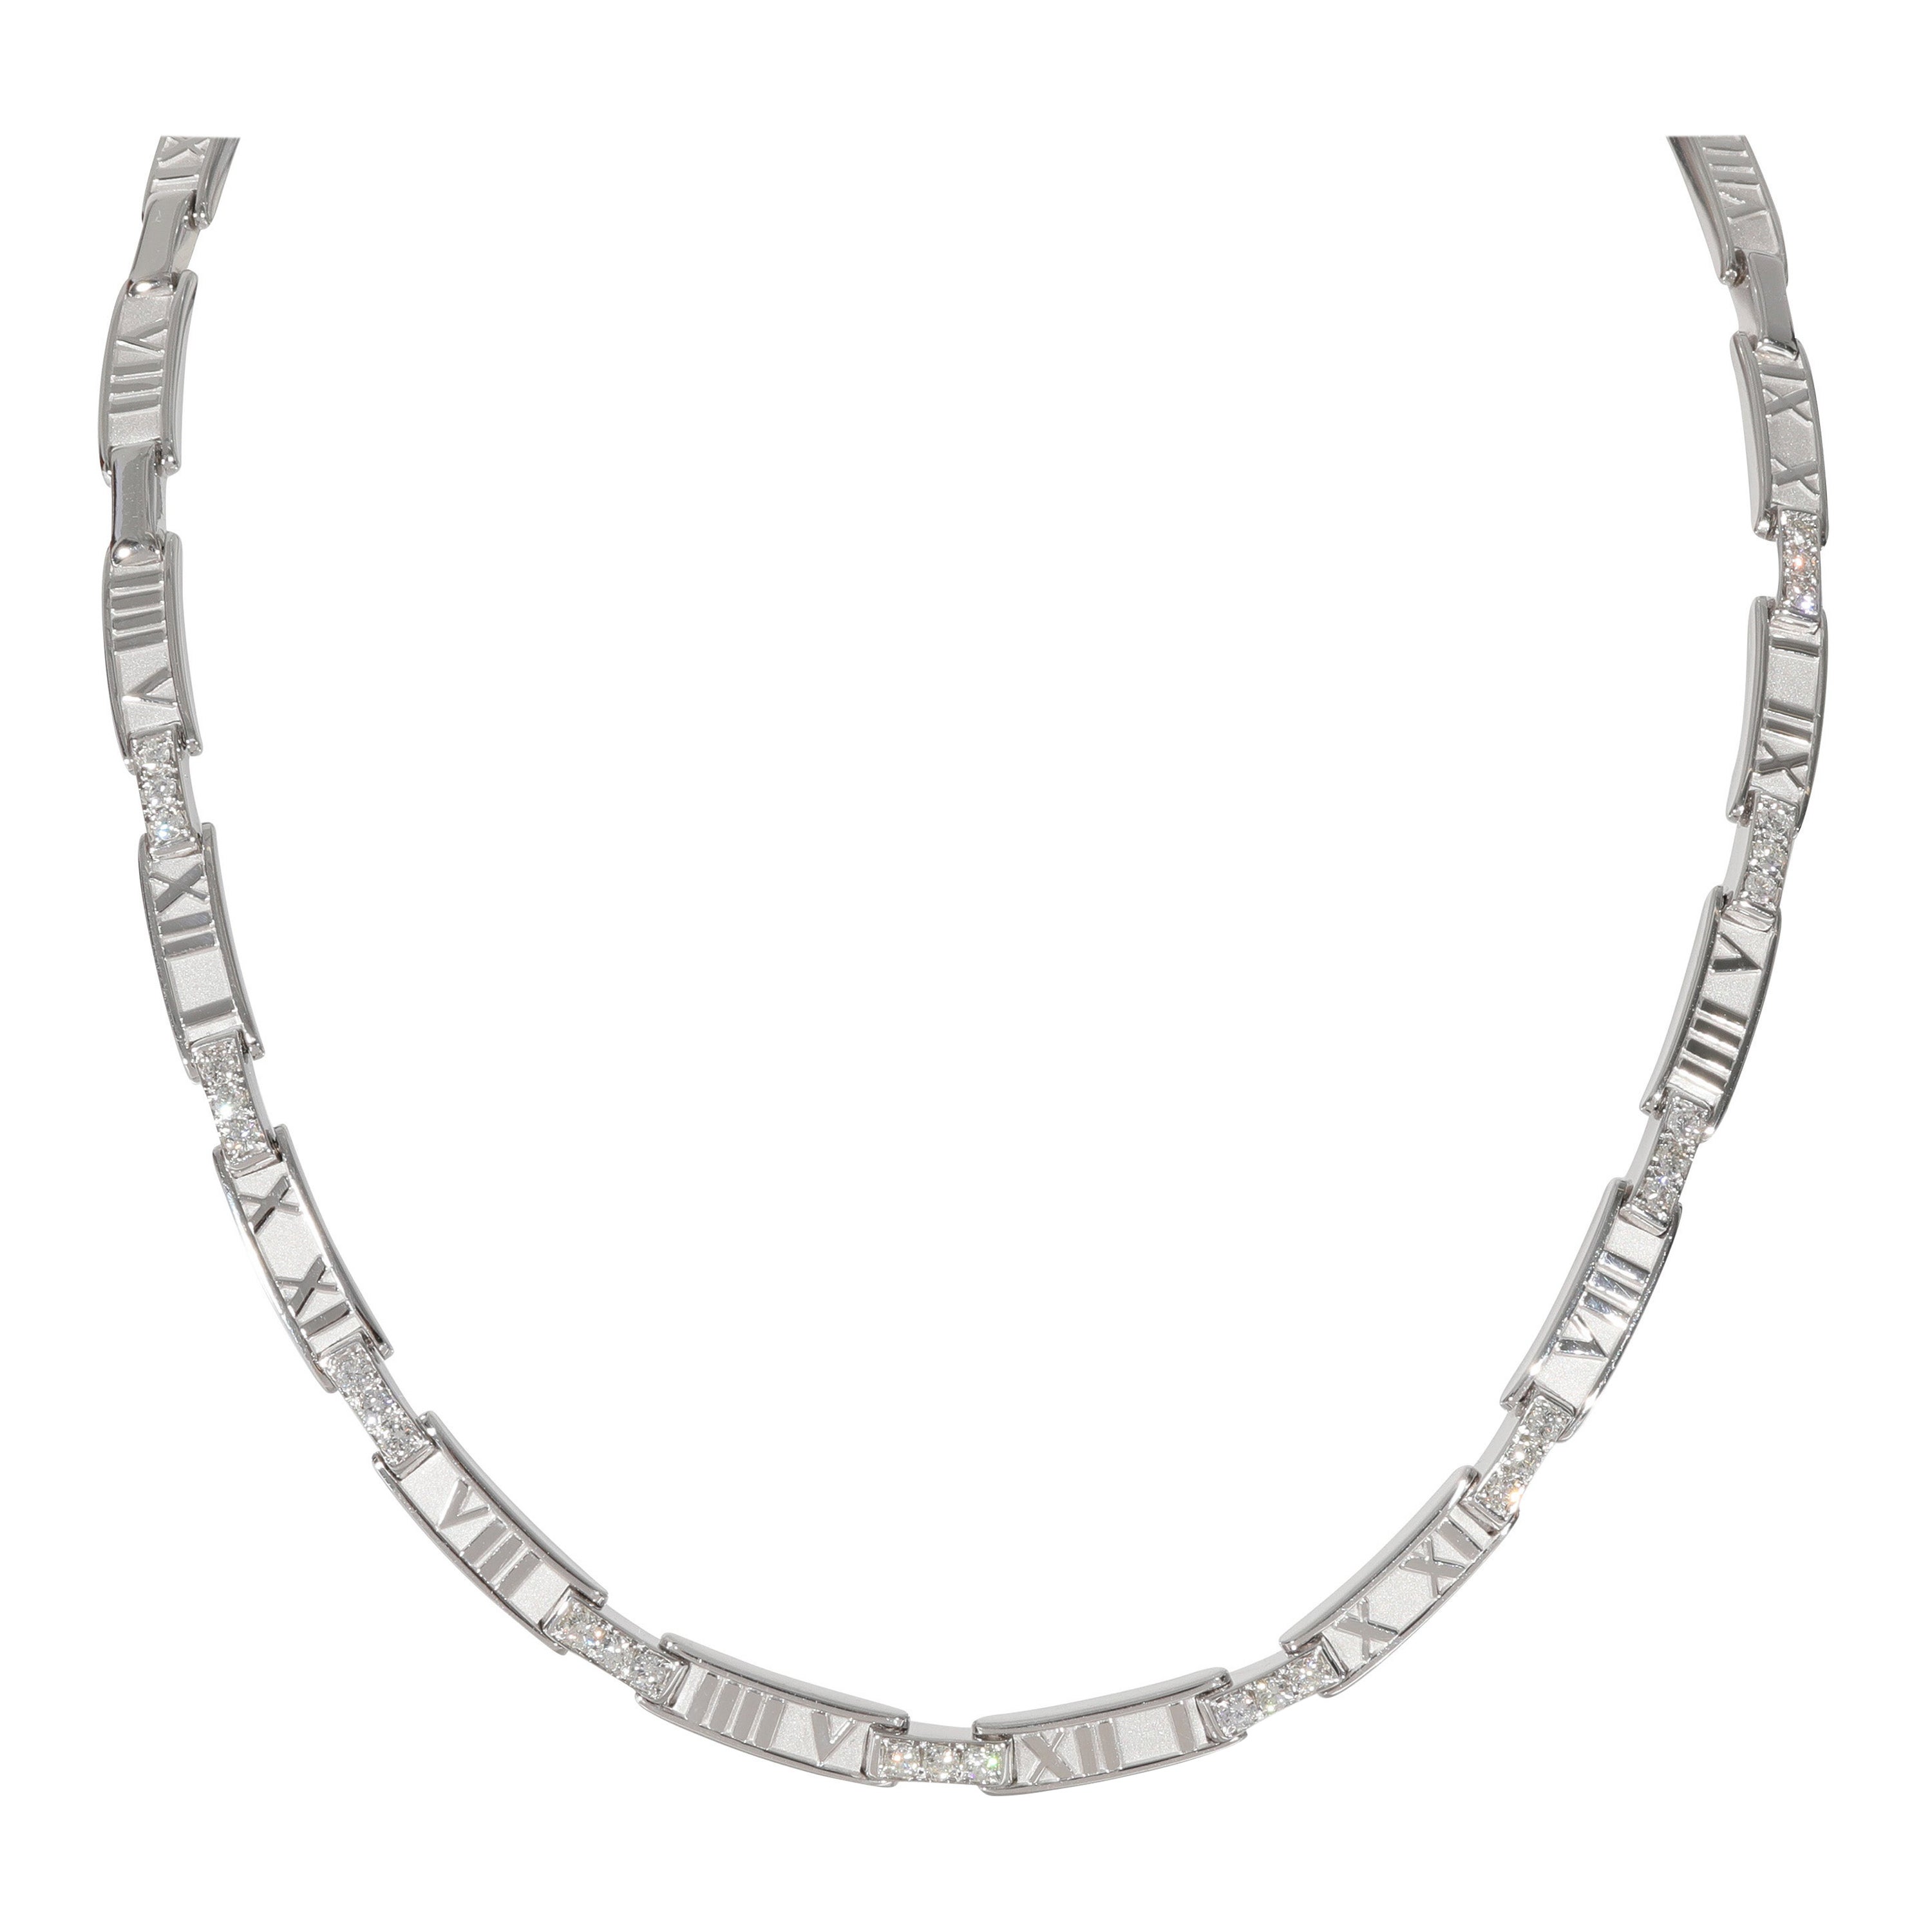 Tiffany & Co. Atlas Diamond Collar Necklace in 18k White Gold 1.5 CTW For Sale